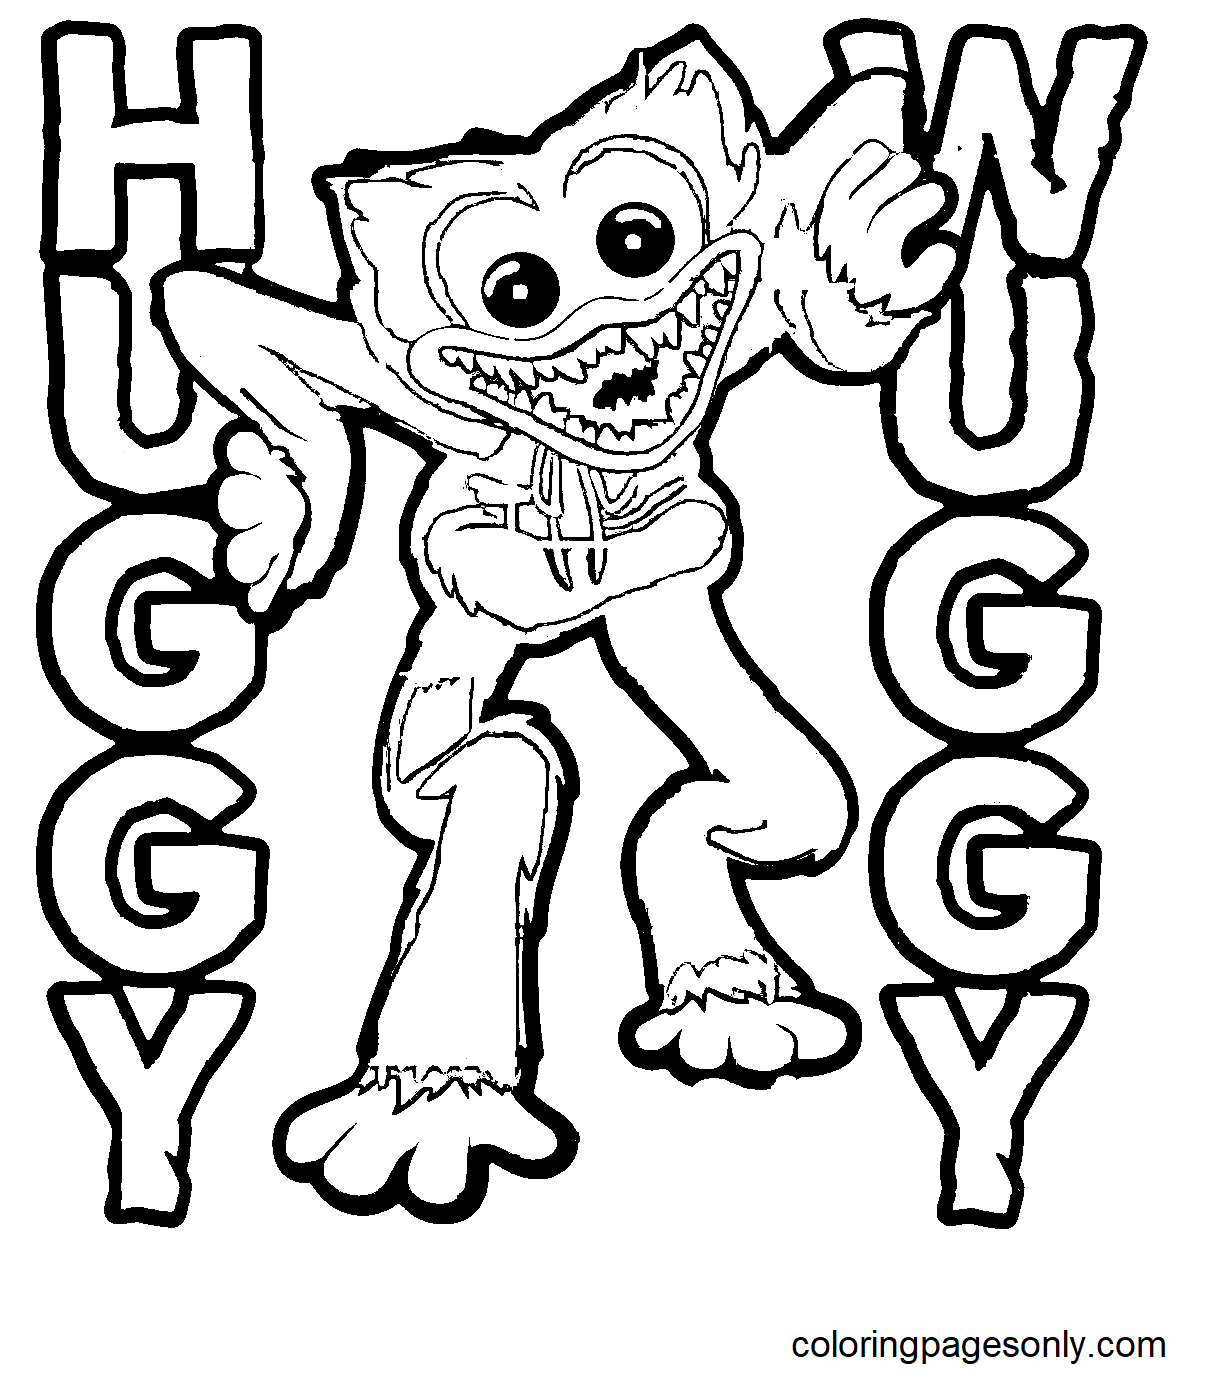 Huggy Wuggy Coloring Page Wuggy Coloring Page Page For Kids And Adults